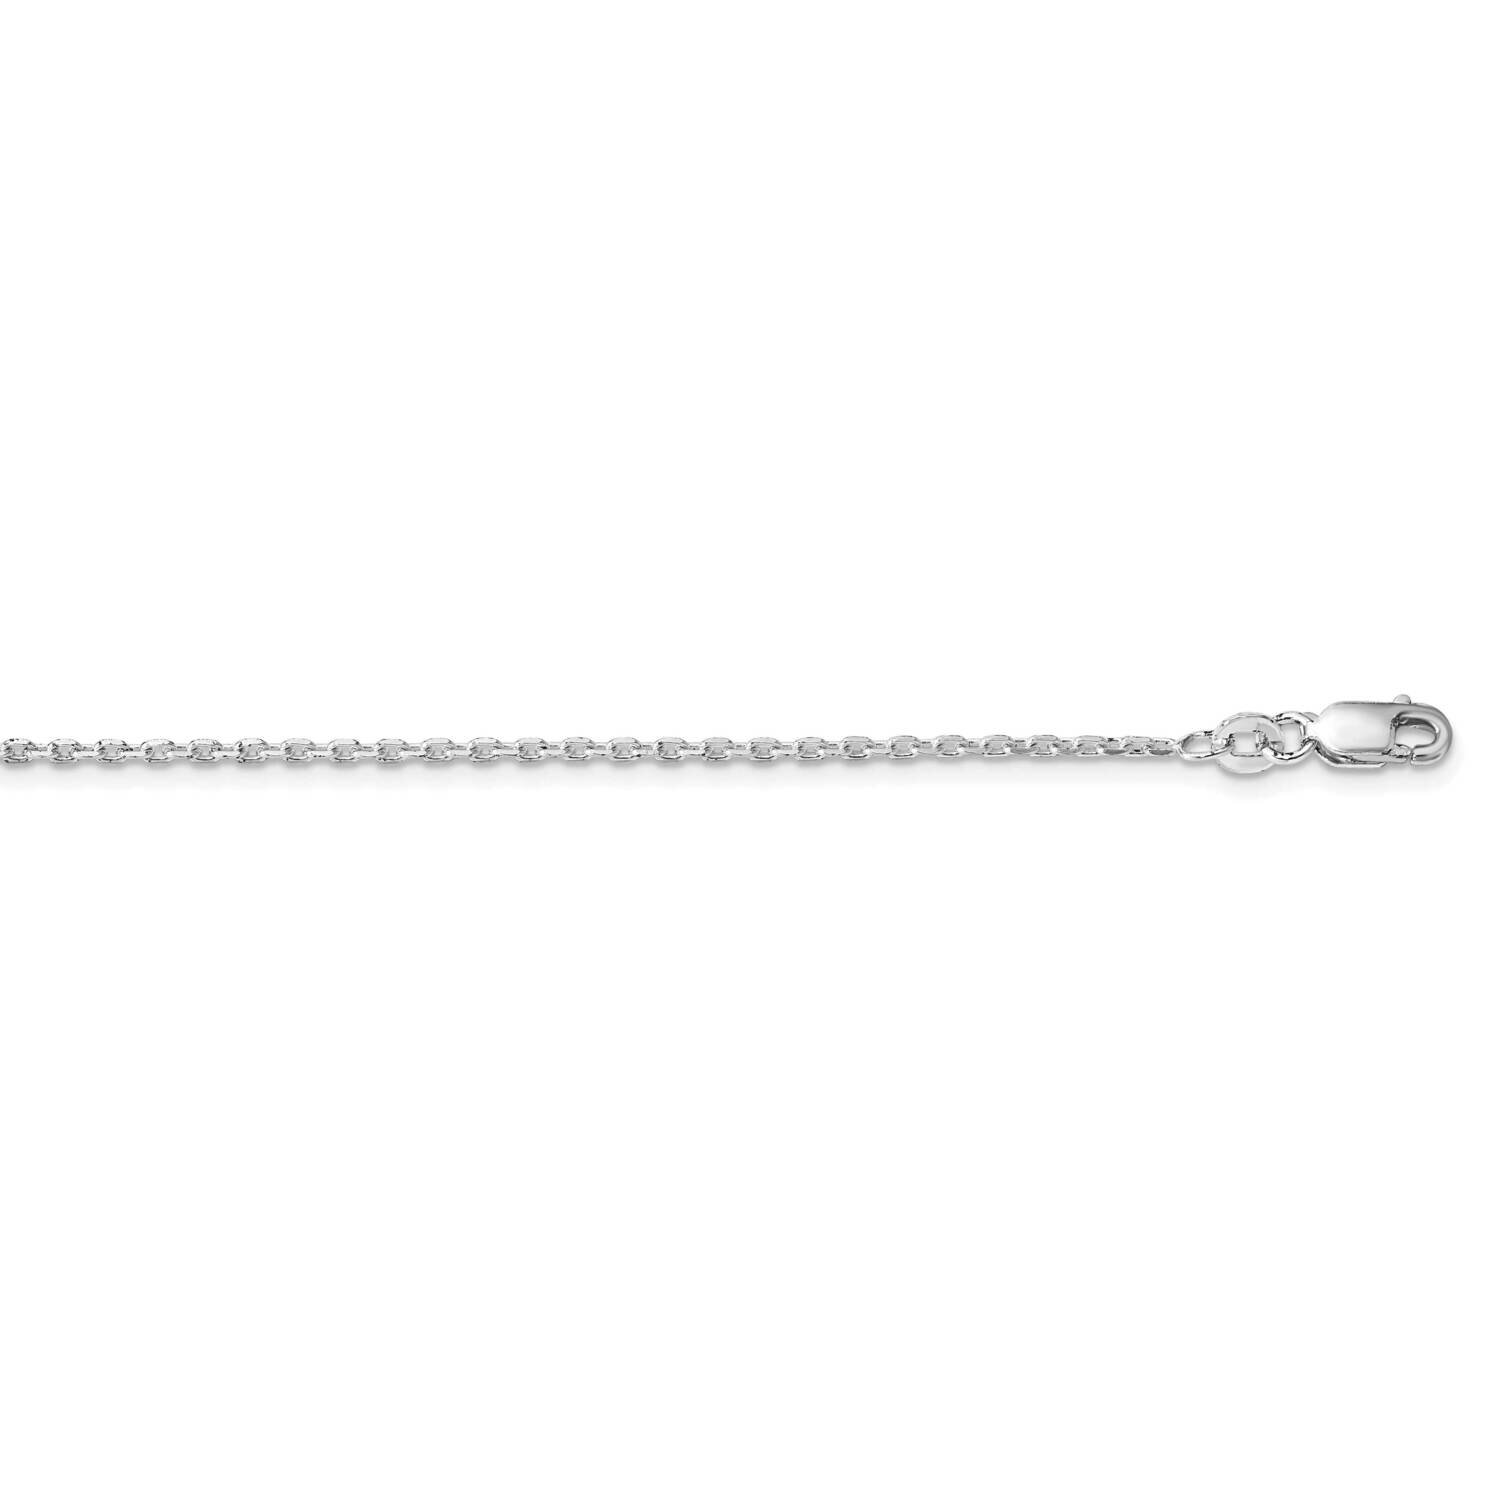 1.5mm Beveled Oval Cable Chain 16 Inch Sterling Silver Rhodium-Plated QCA050R-16